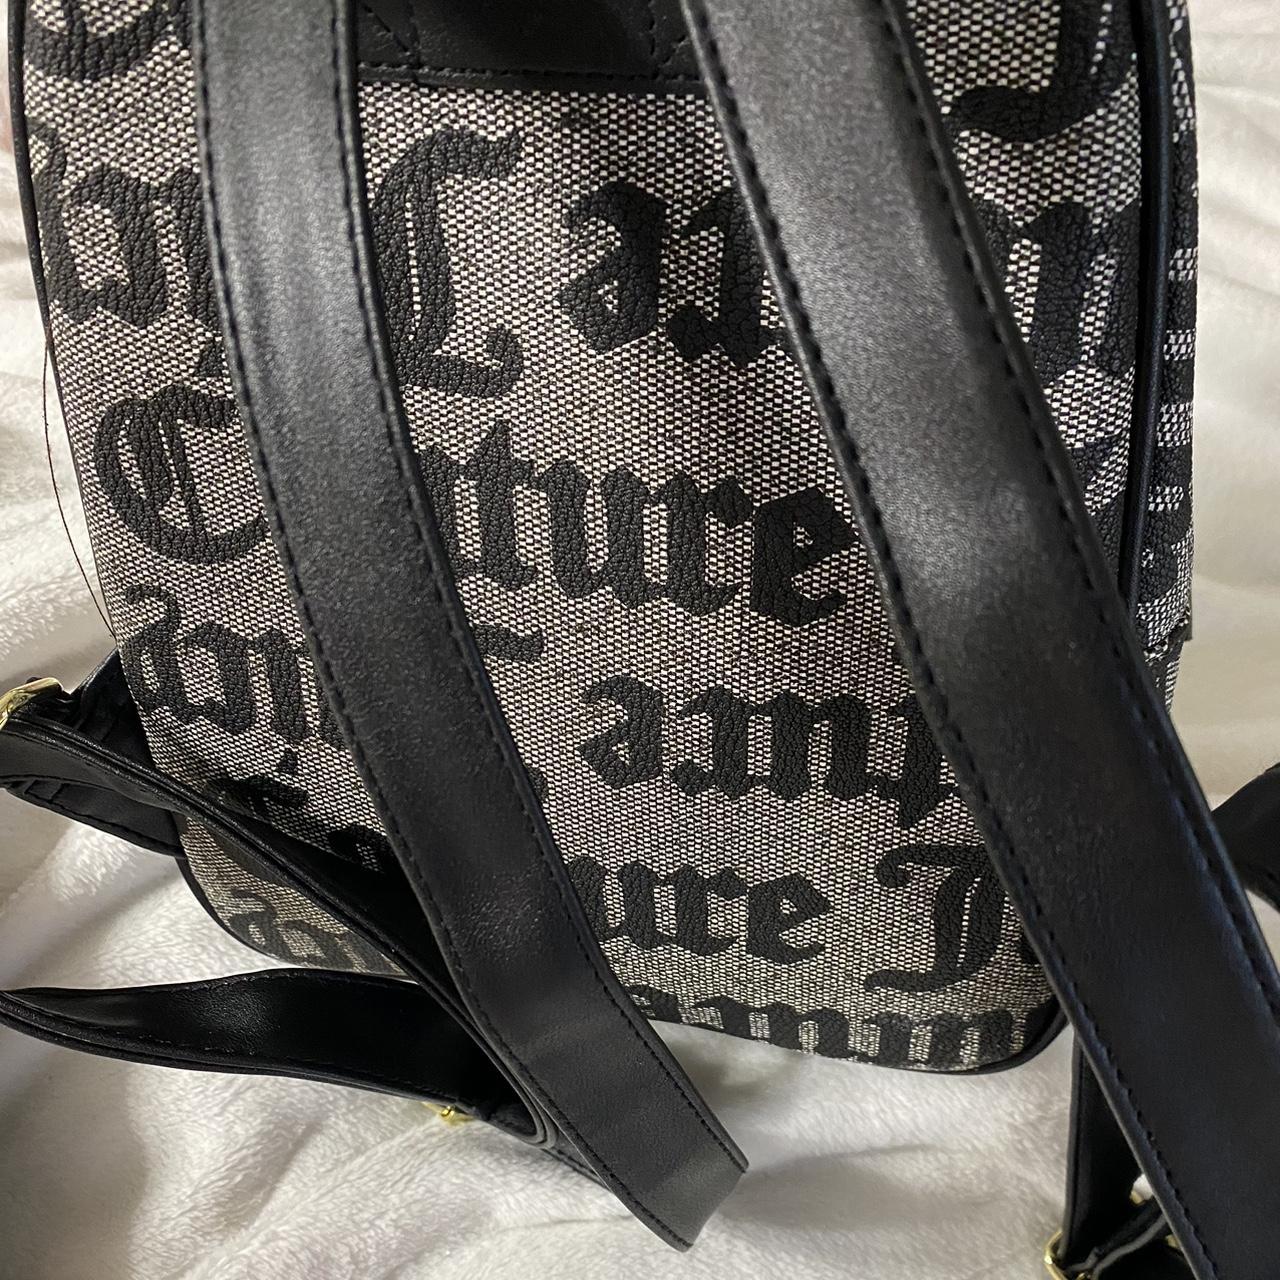 Juicy Couture Backpack Never been used, in new - Depop